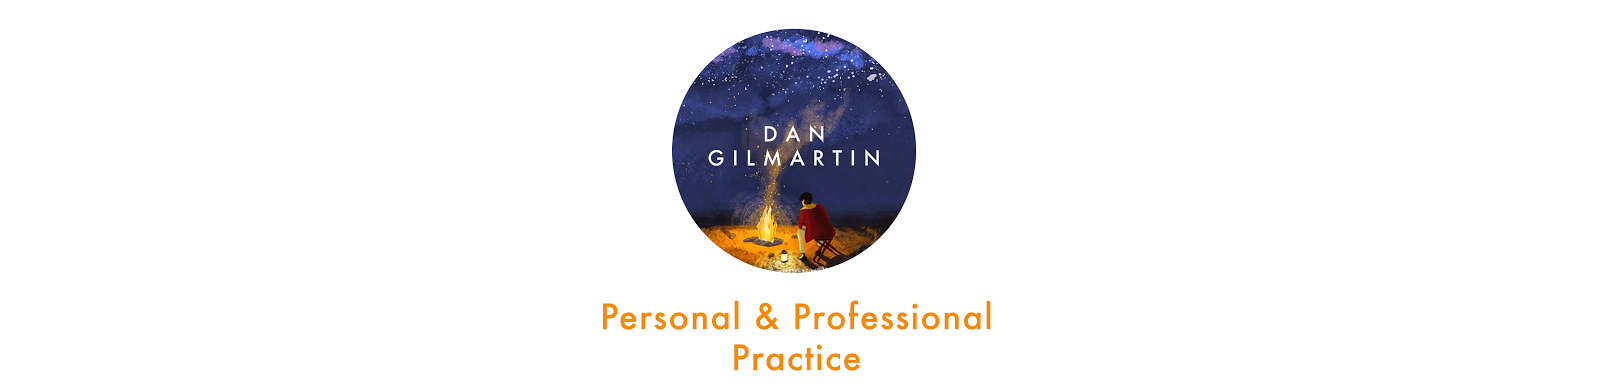  Personal & Professional Practice